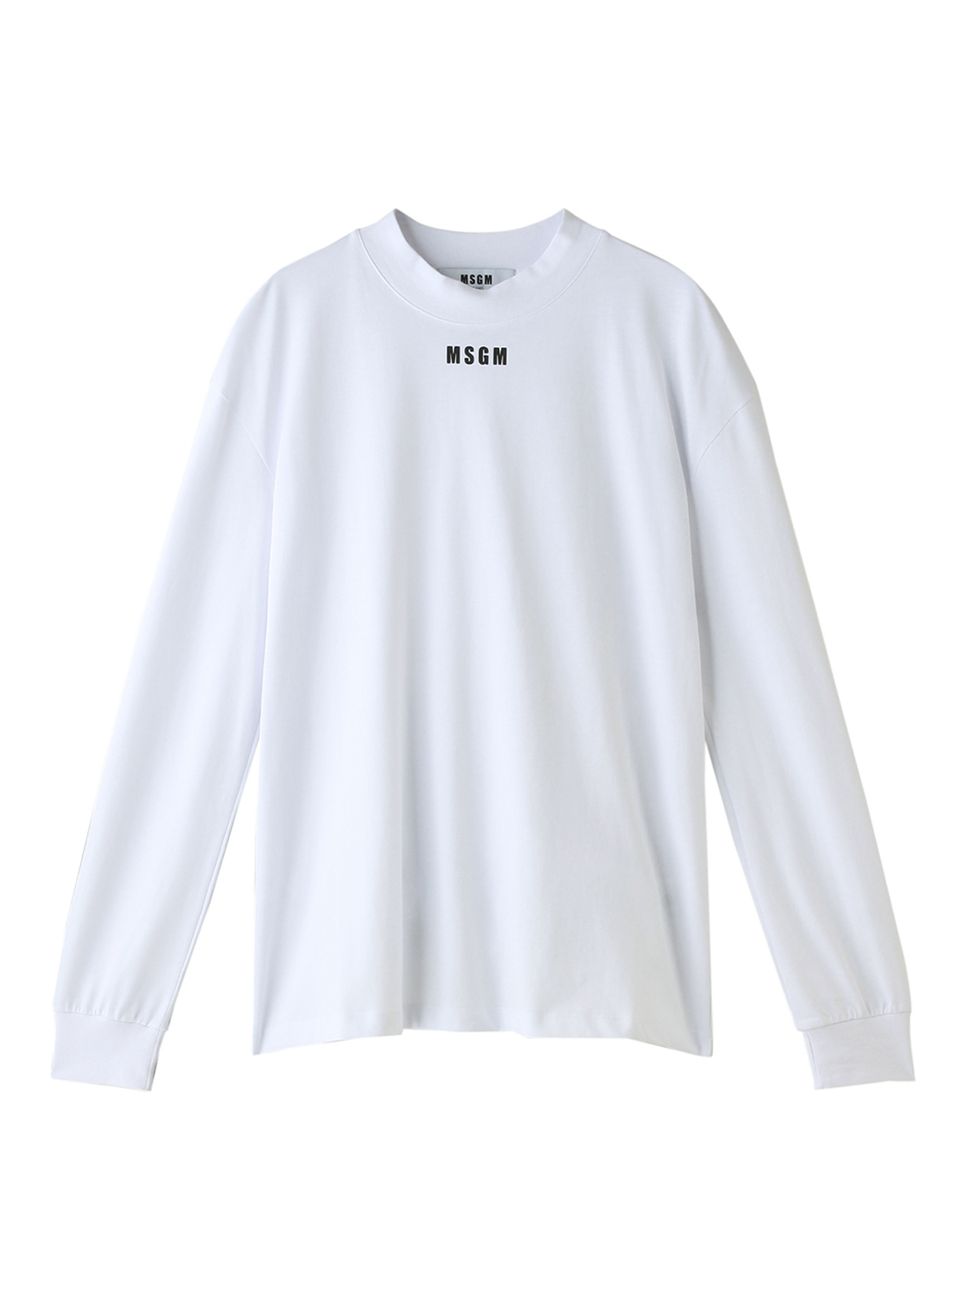 Clothing, White, Sleeve, Long-sleeved t-shirt, T-shirt, Outerwear, Top, Sweater, Blouse, Shirt, 